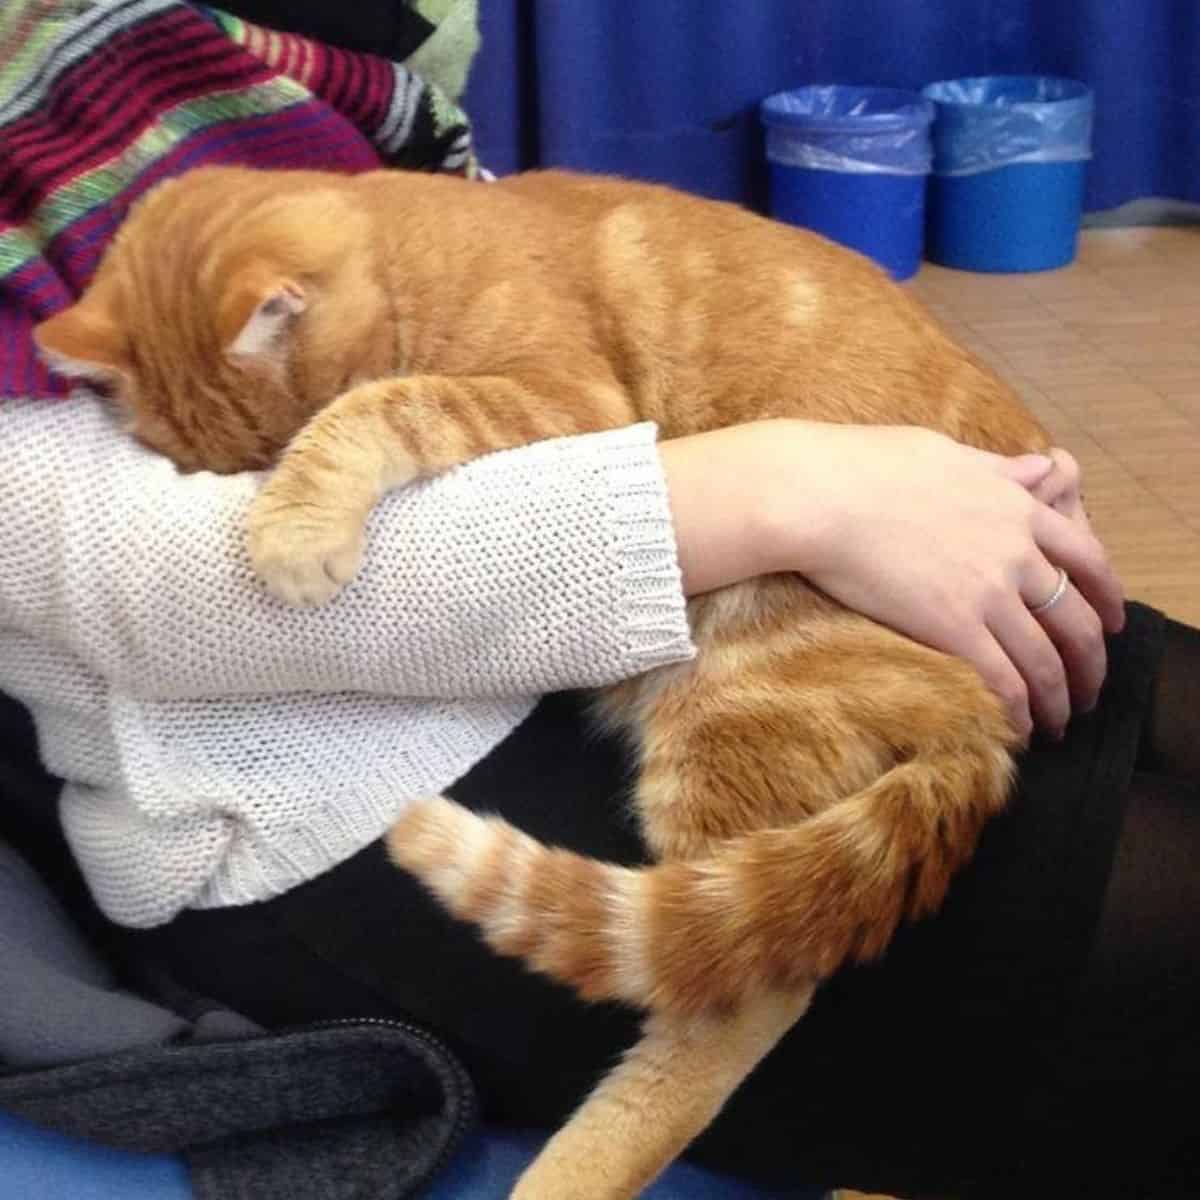 the yellow cat is sleeping in the girl's arms